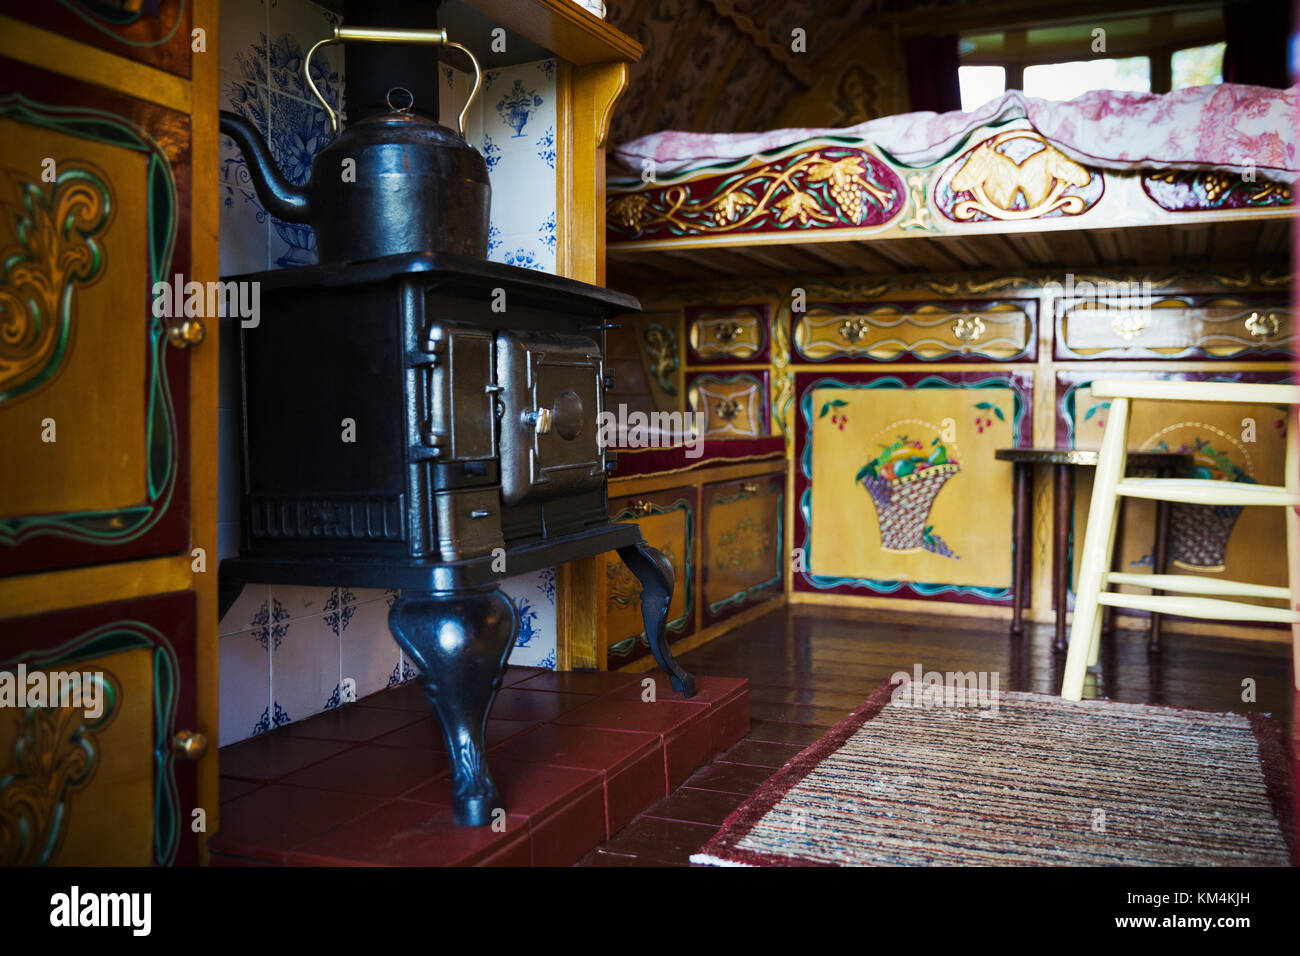 A cast iron stove with large metal kettle, a mantlepiece and storage cupboards and raised bed, the interior of a gypsy caravan, Stock Photo